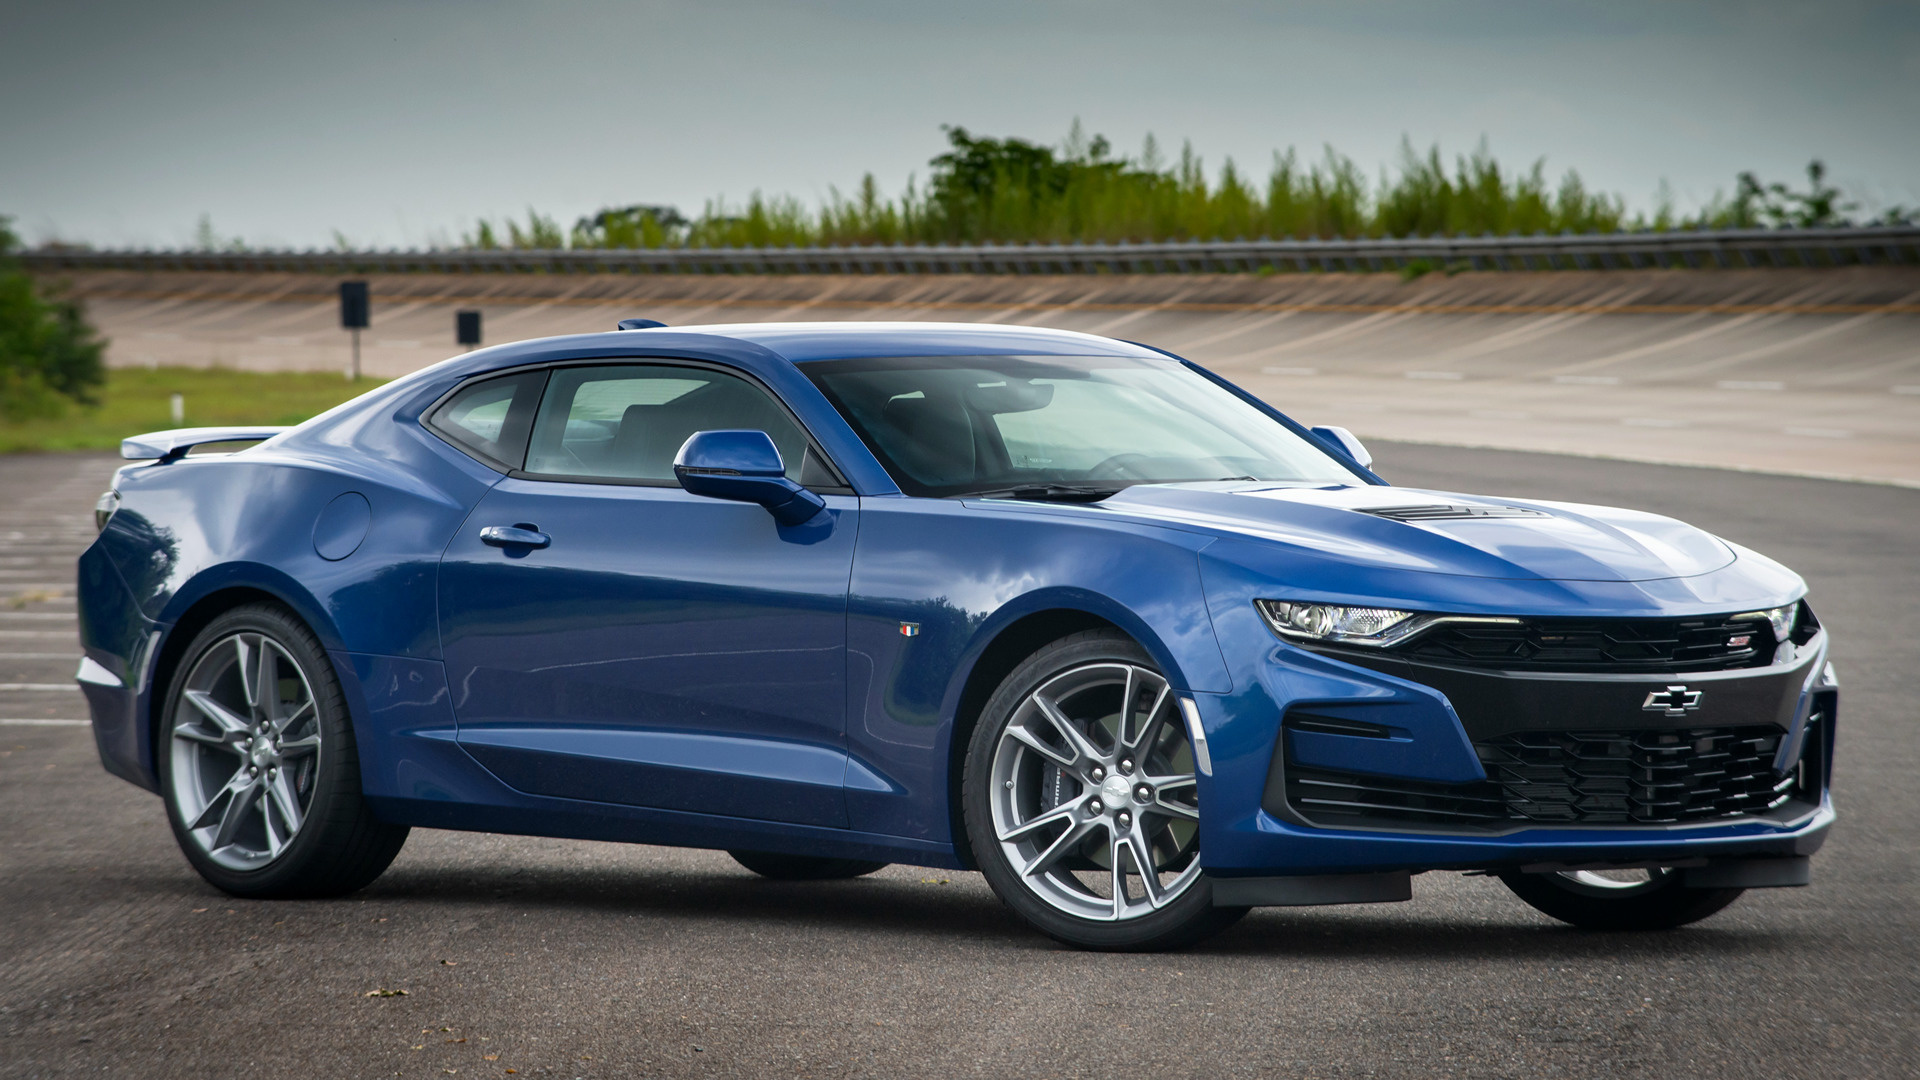 2019 Chevrolet Camaro SS (BR) Wallpapers and HD Images